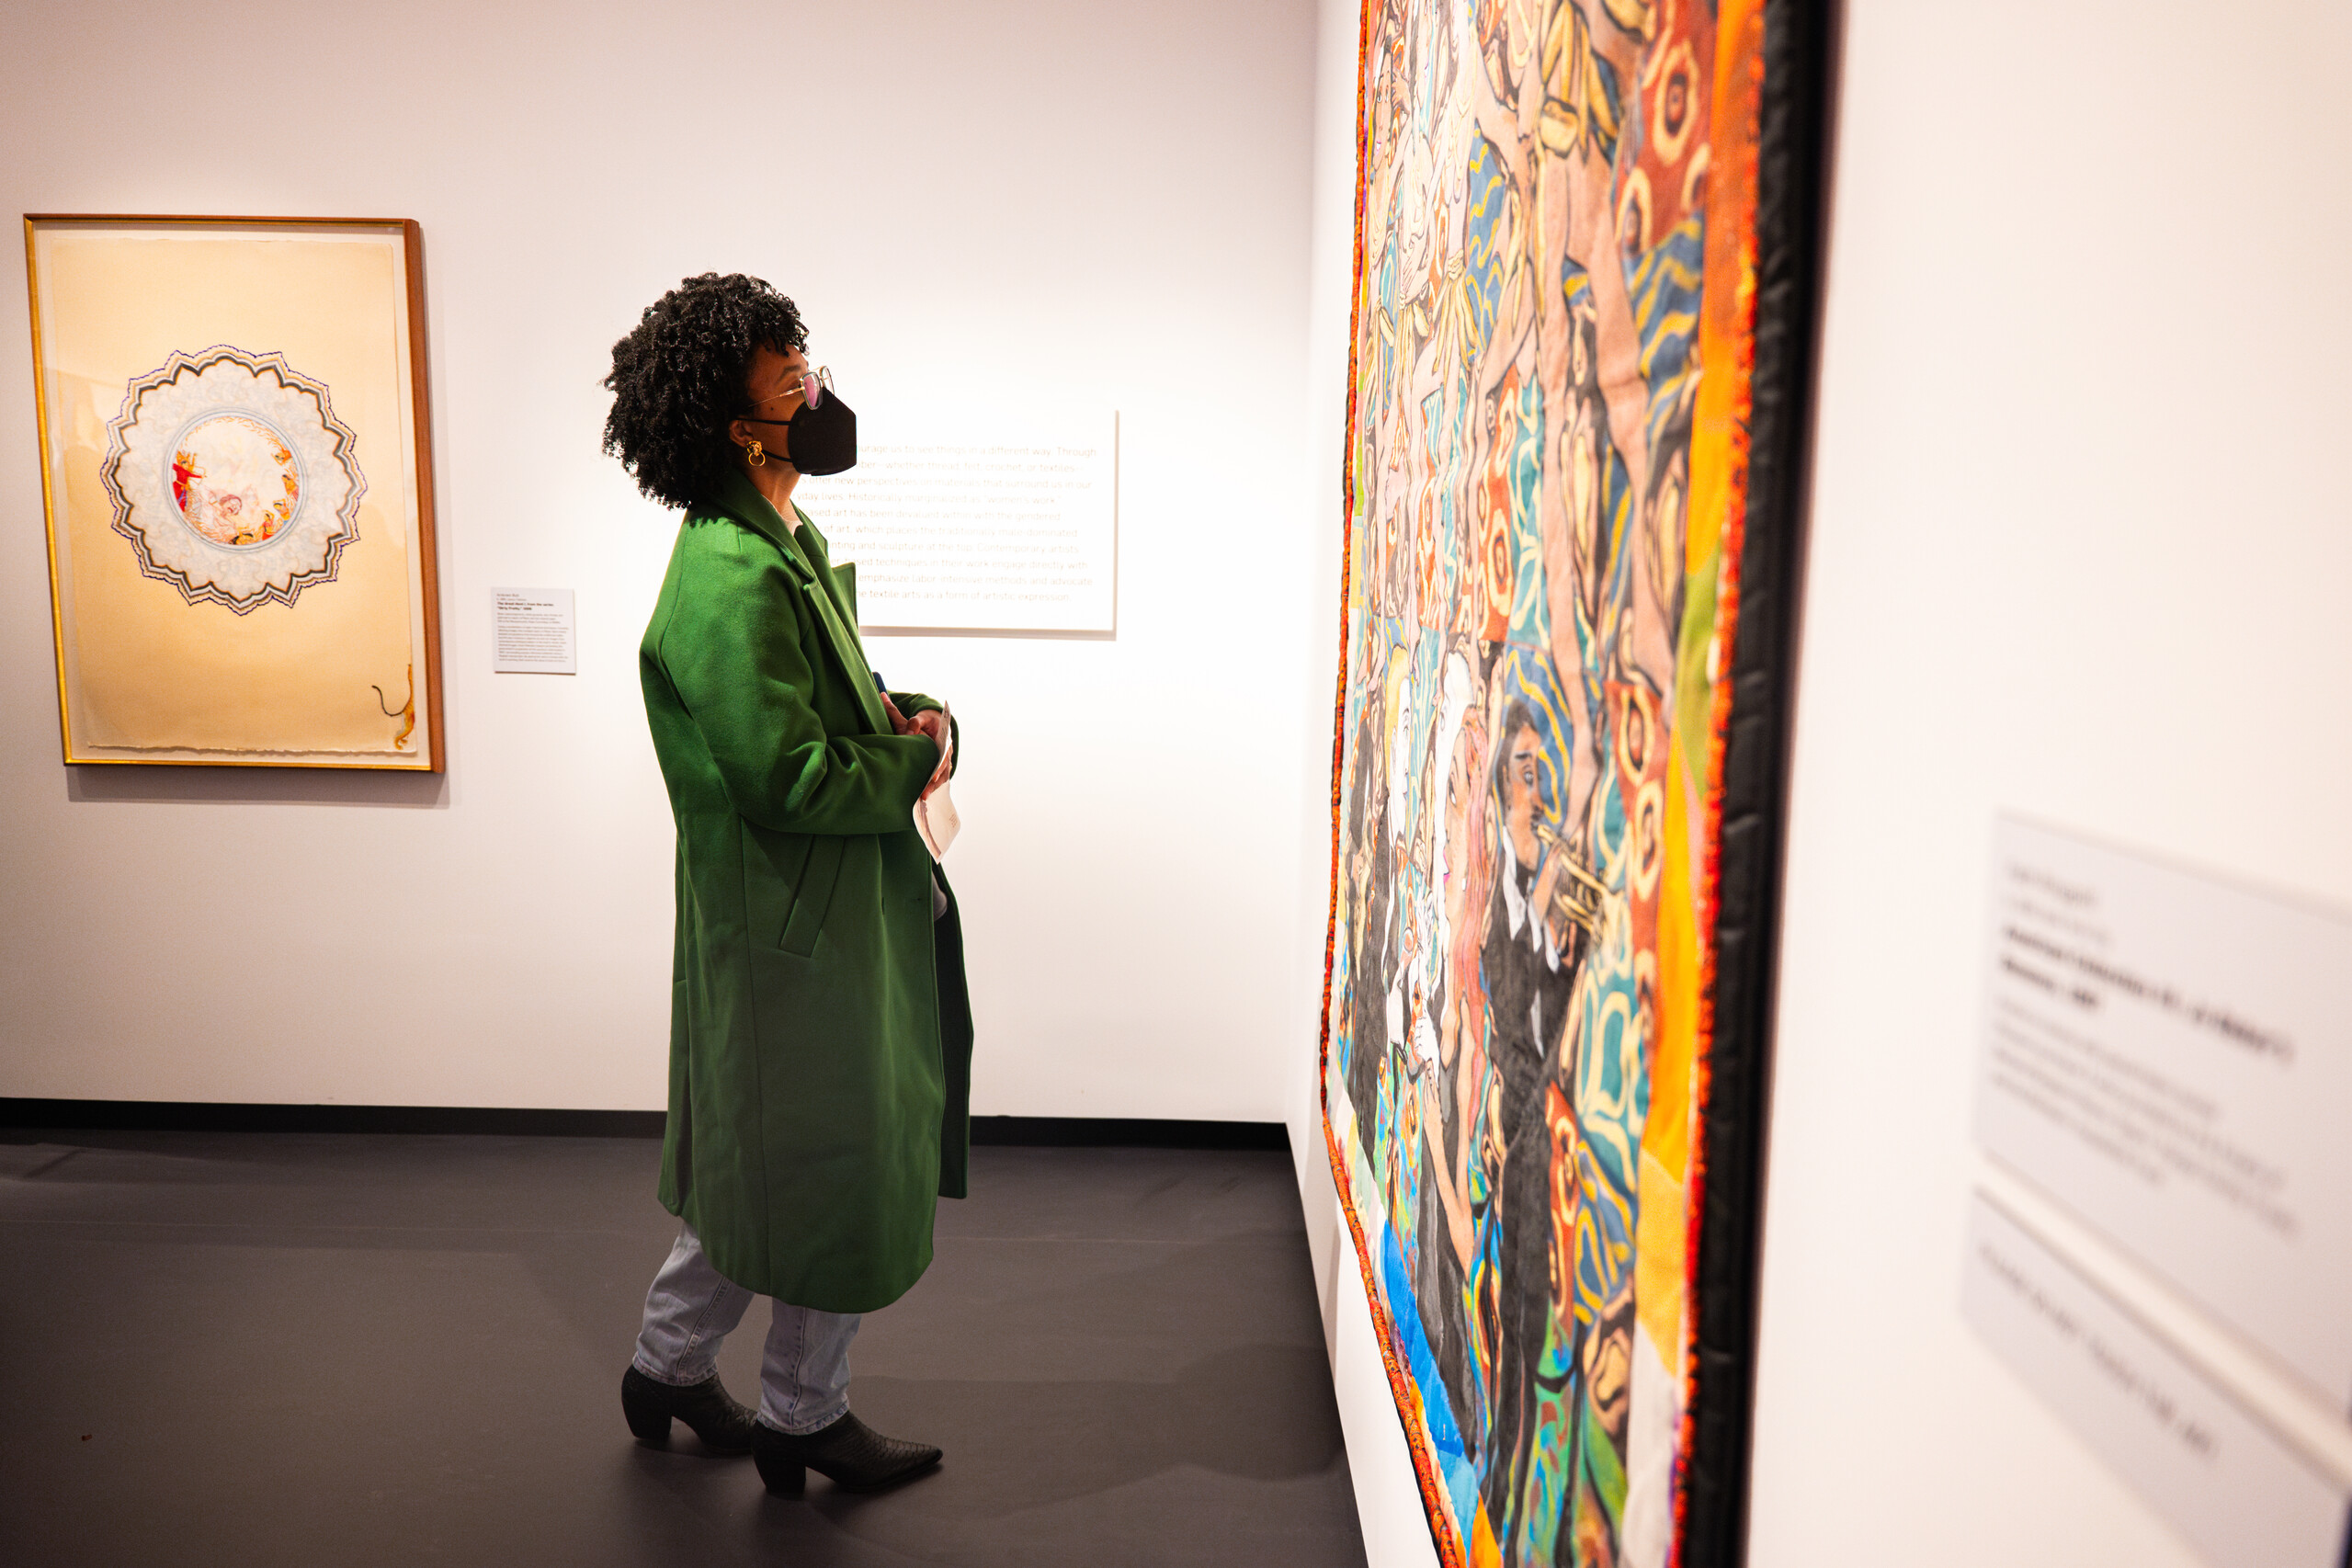 A woman in a green coat looks at a colorful painting